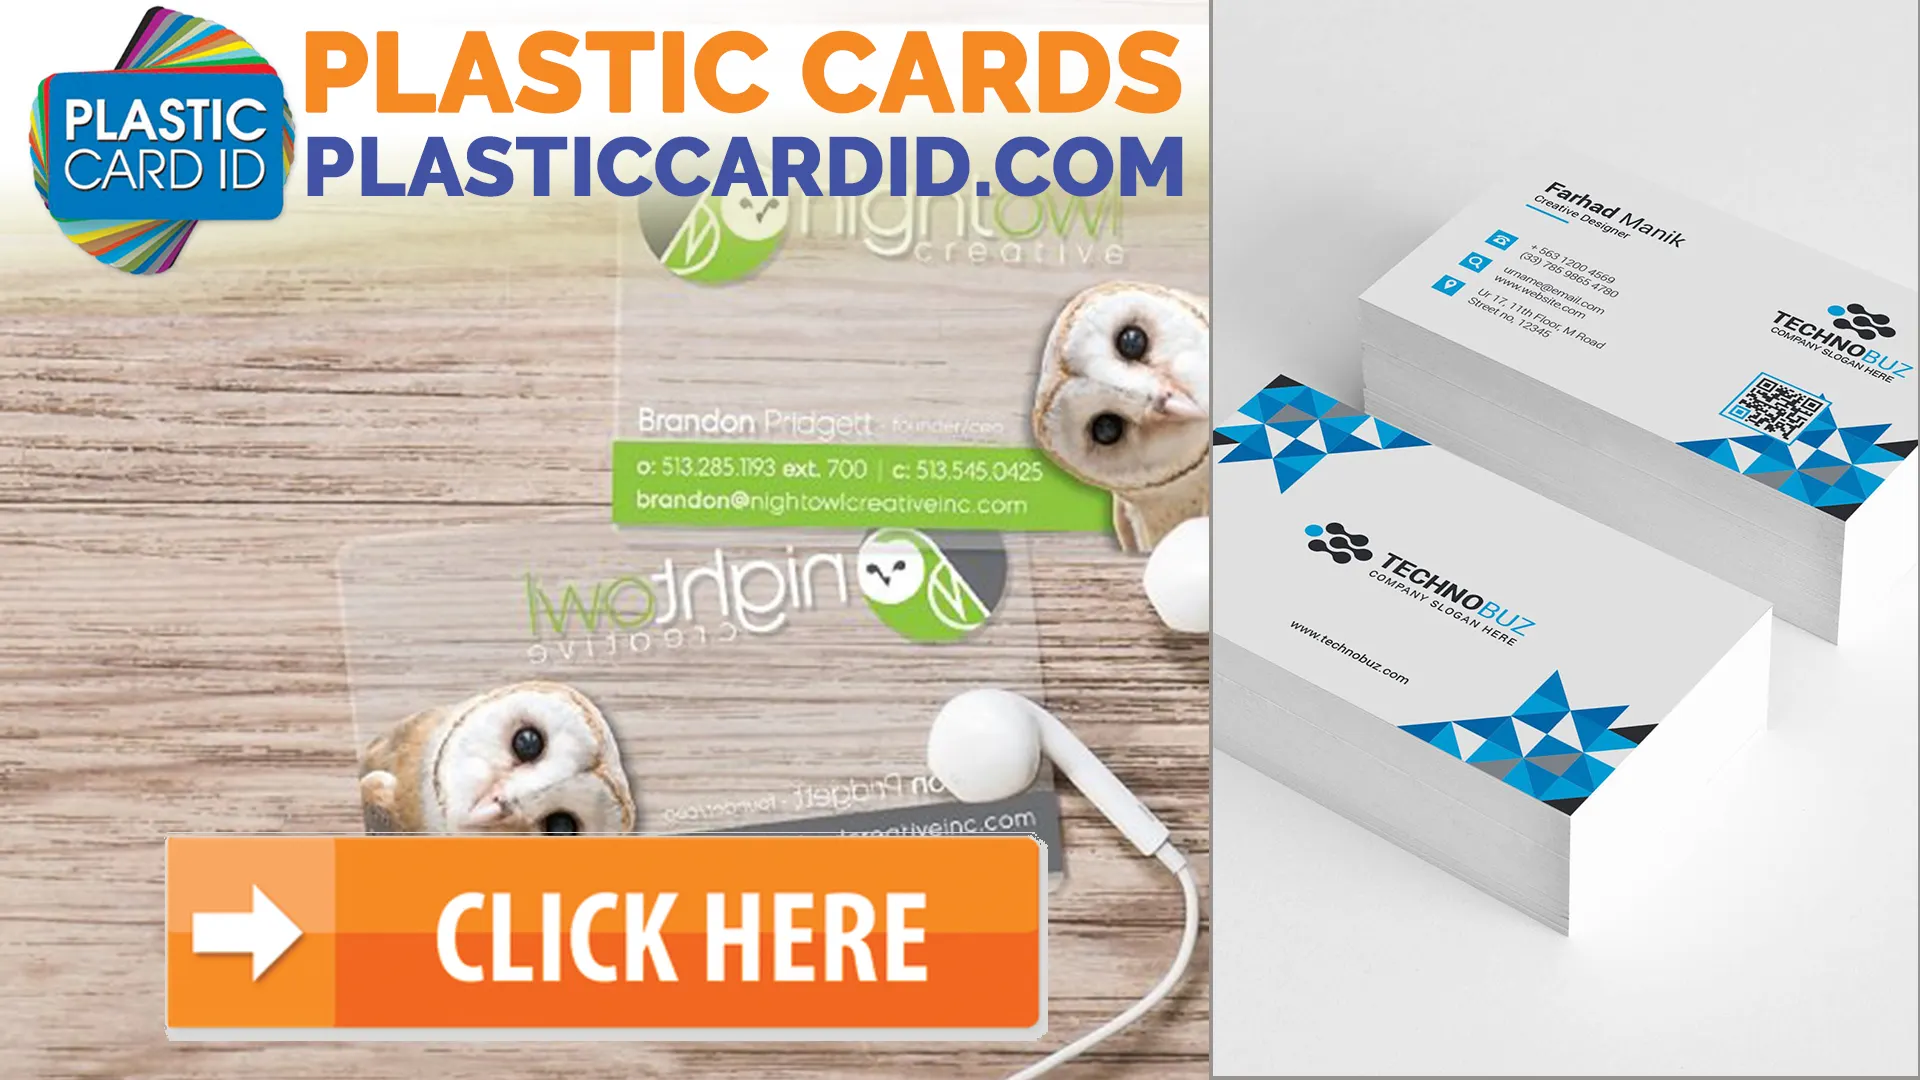 A Portfolio of Diverse and High-Quality Plastic Card Products